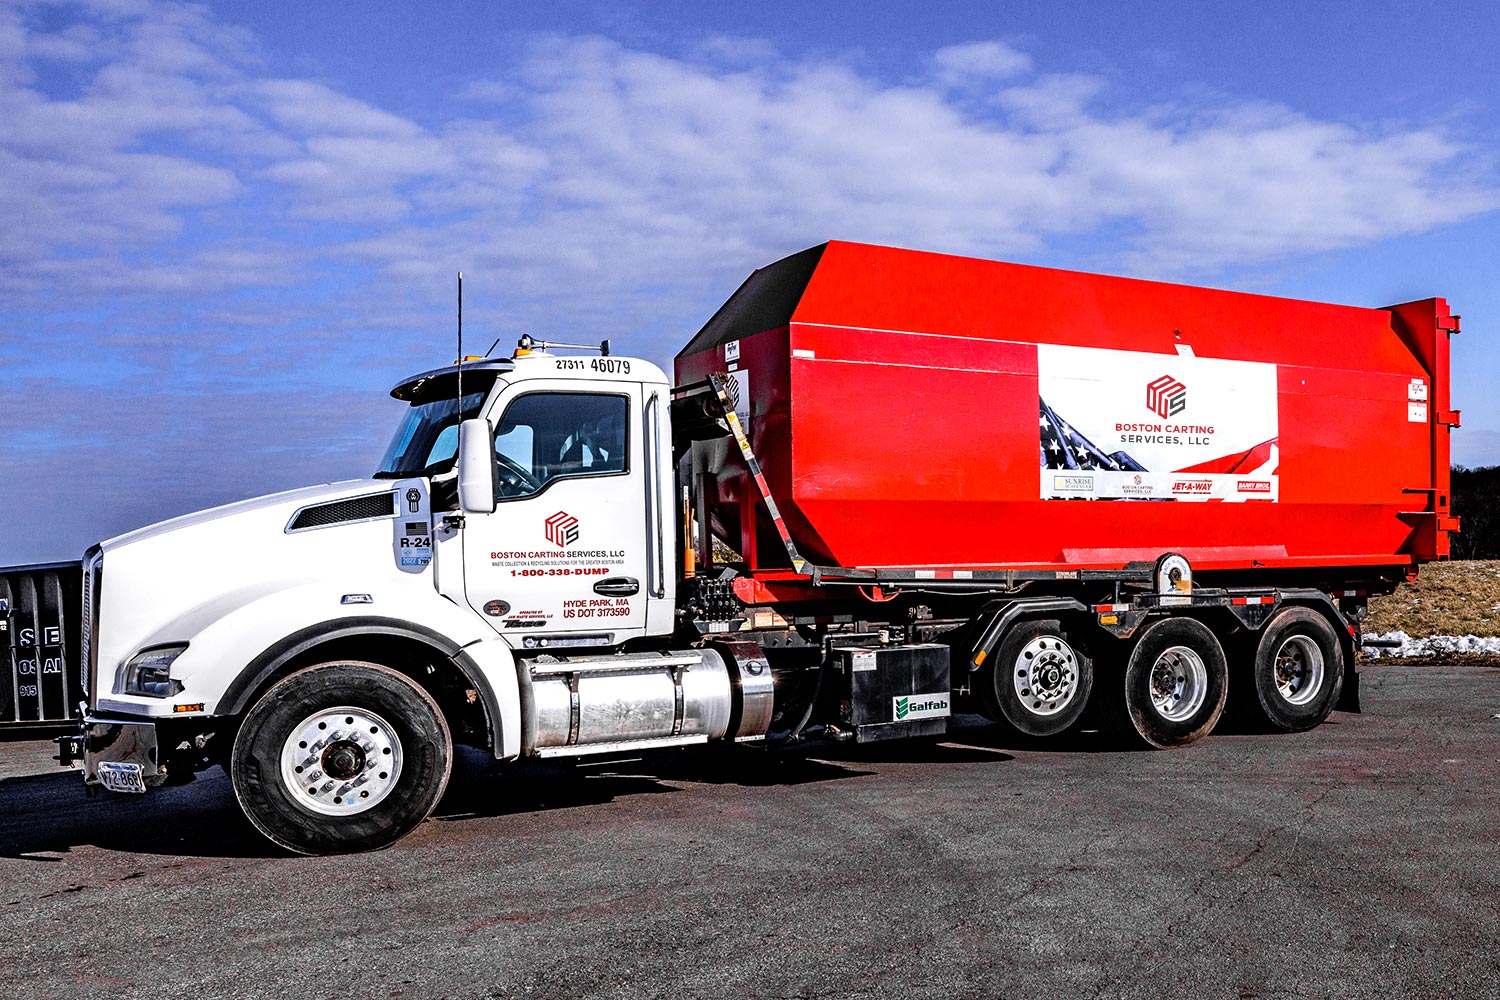 Compactor Truck - Municipal Services - Boston Carting Services